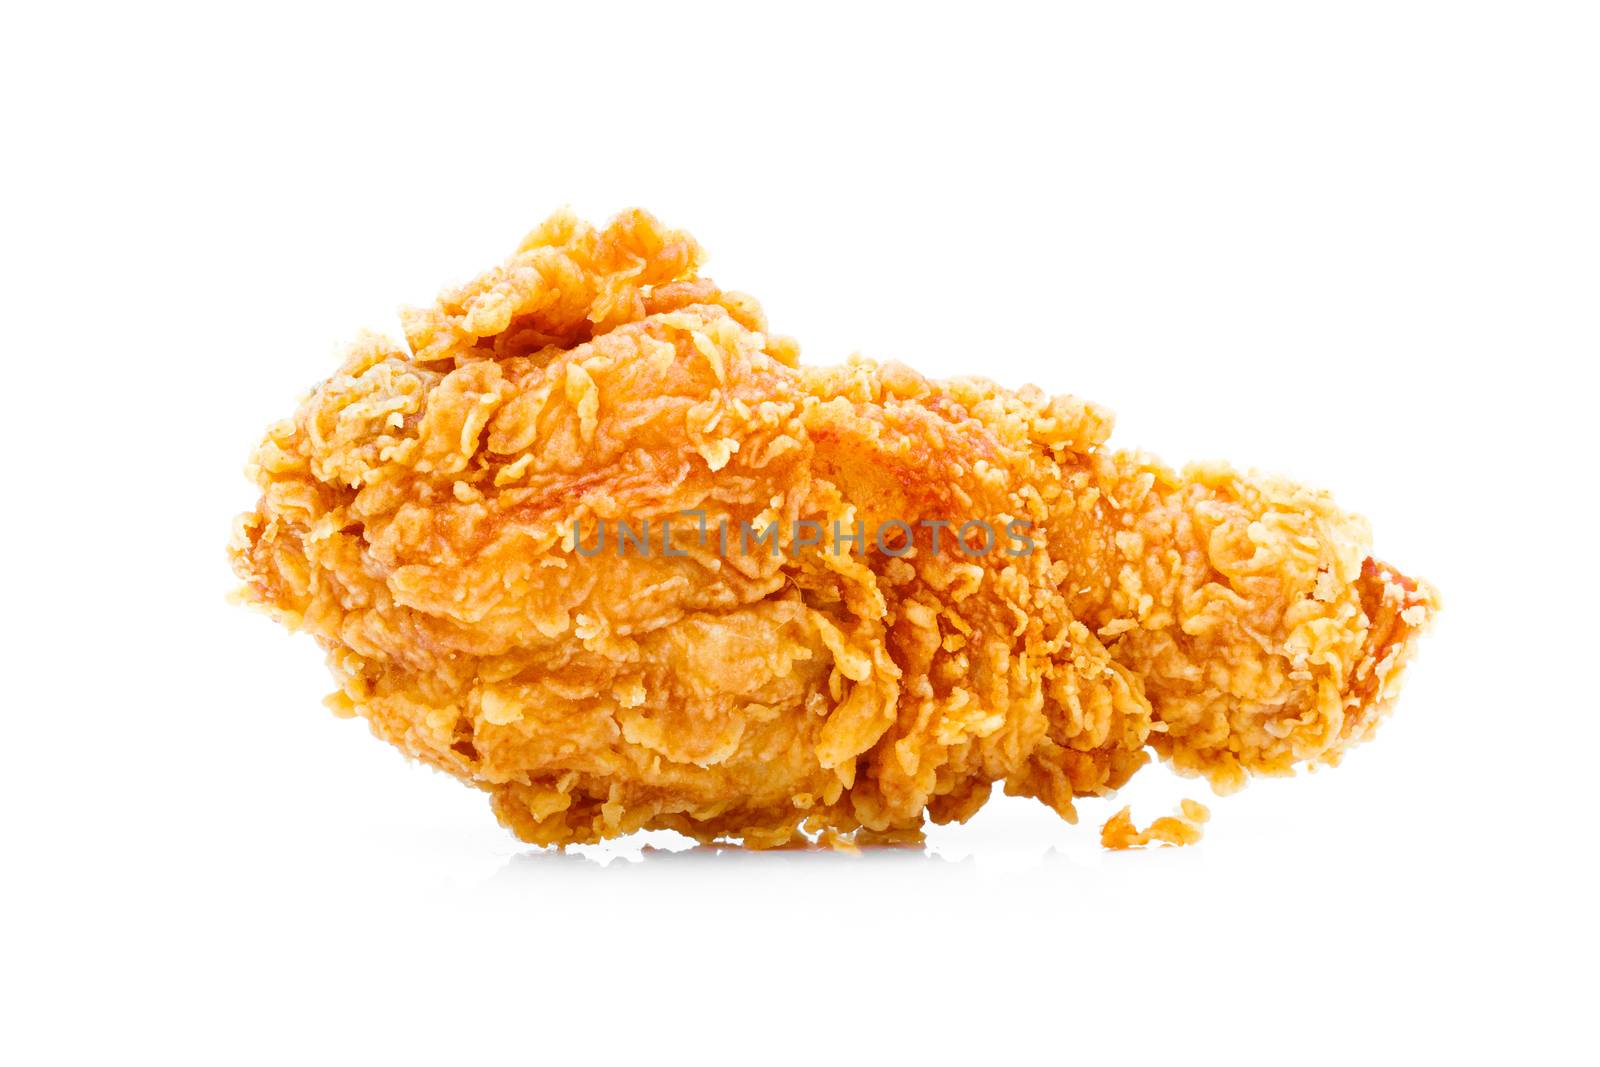 Fried Crispy Chicken on a white background by sompongtom